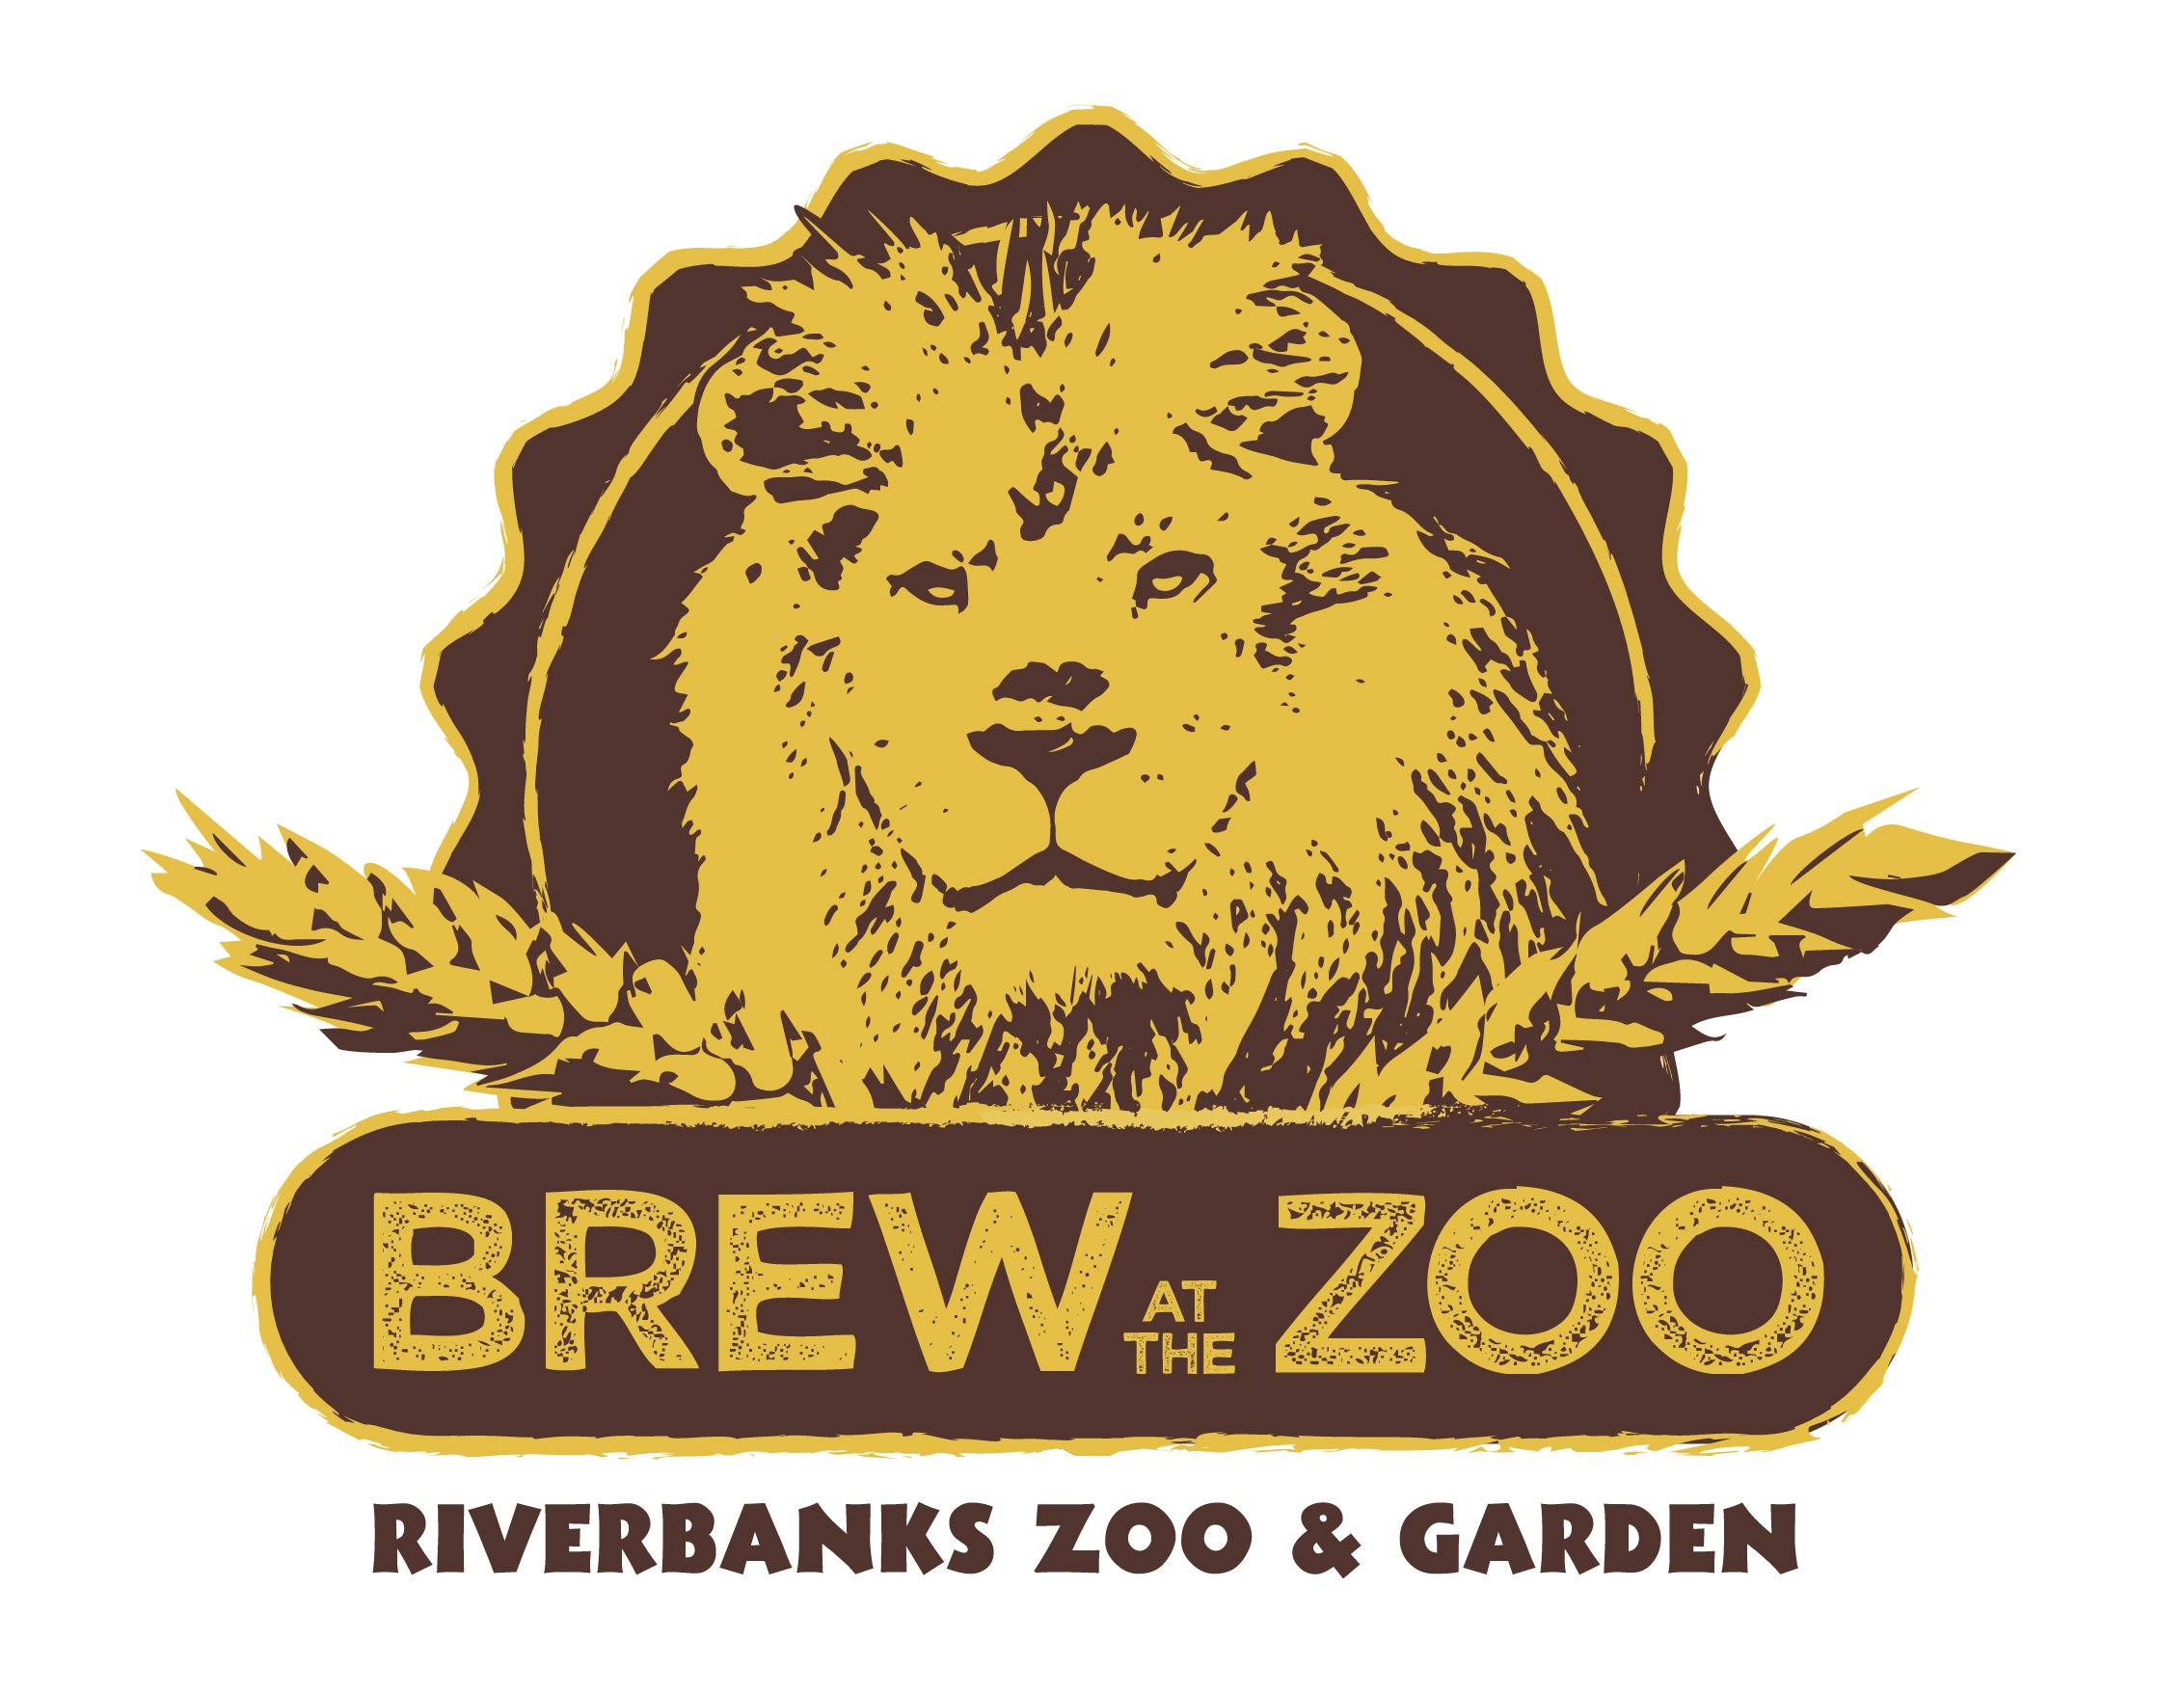 brew at the zoo riverbanks zoo and garden illustration of a male lion head and grains of barley